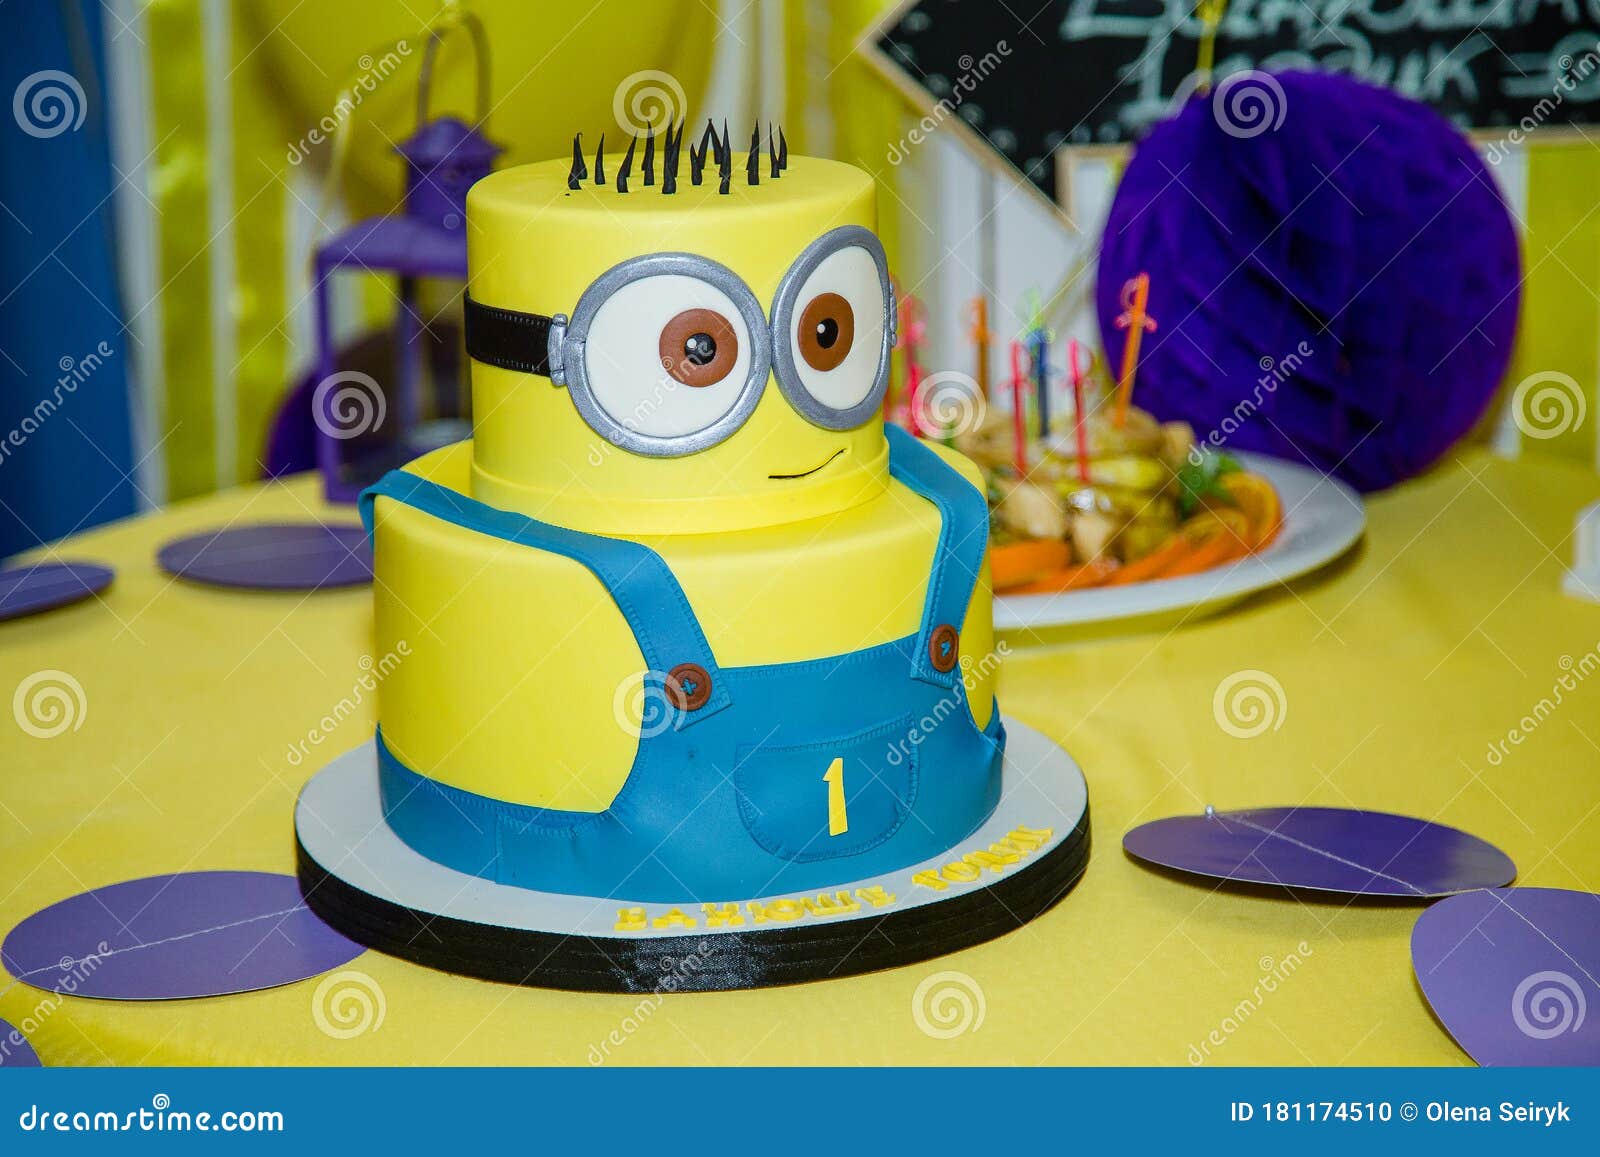 Birthday Cake in Minion Shape. Cartoon Character Cake for Child Party.  Thematic Event Editorial Image - Image of event, cake: 181174510